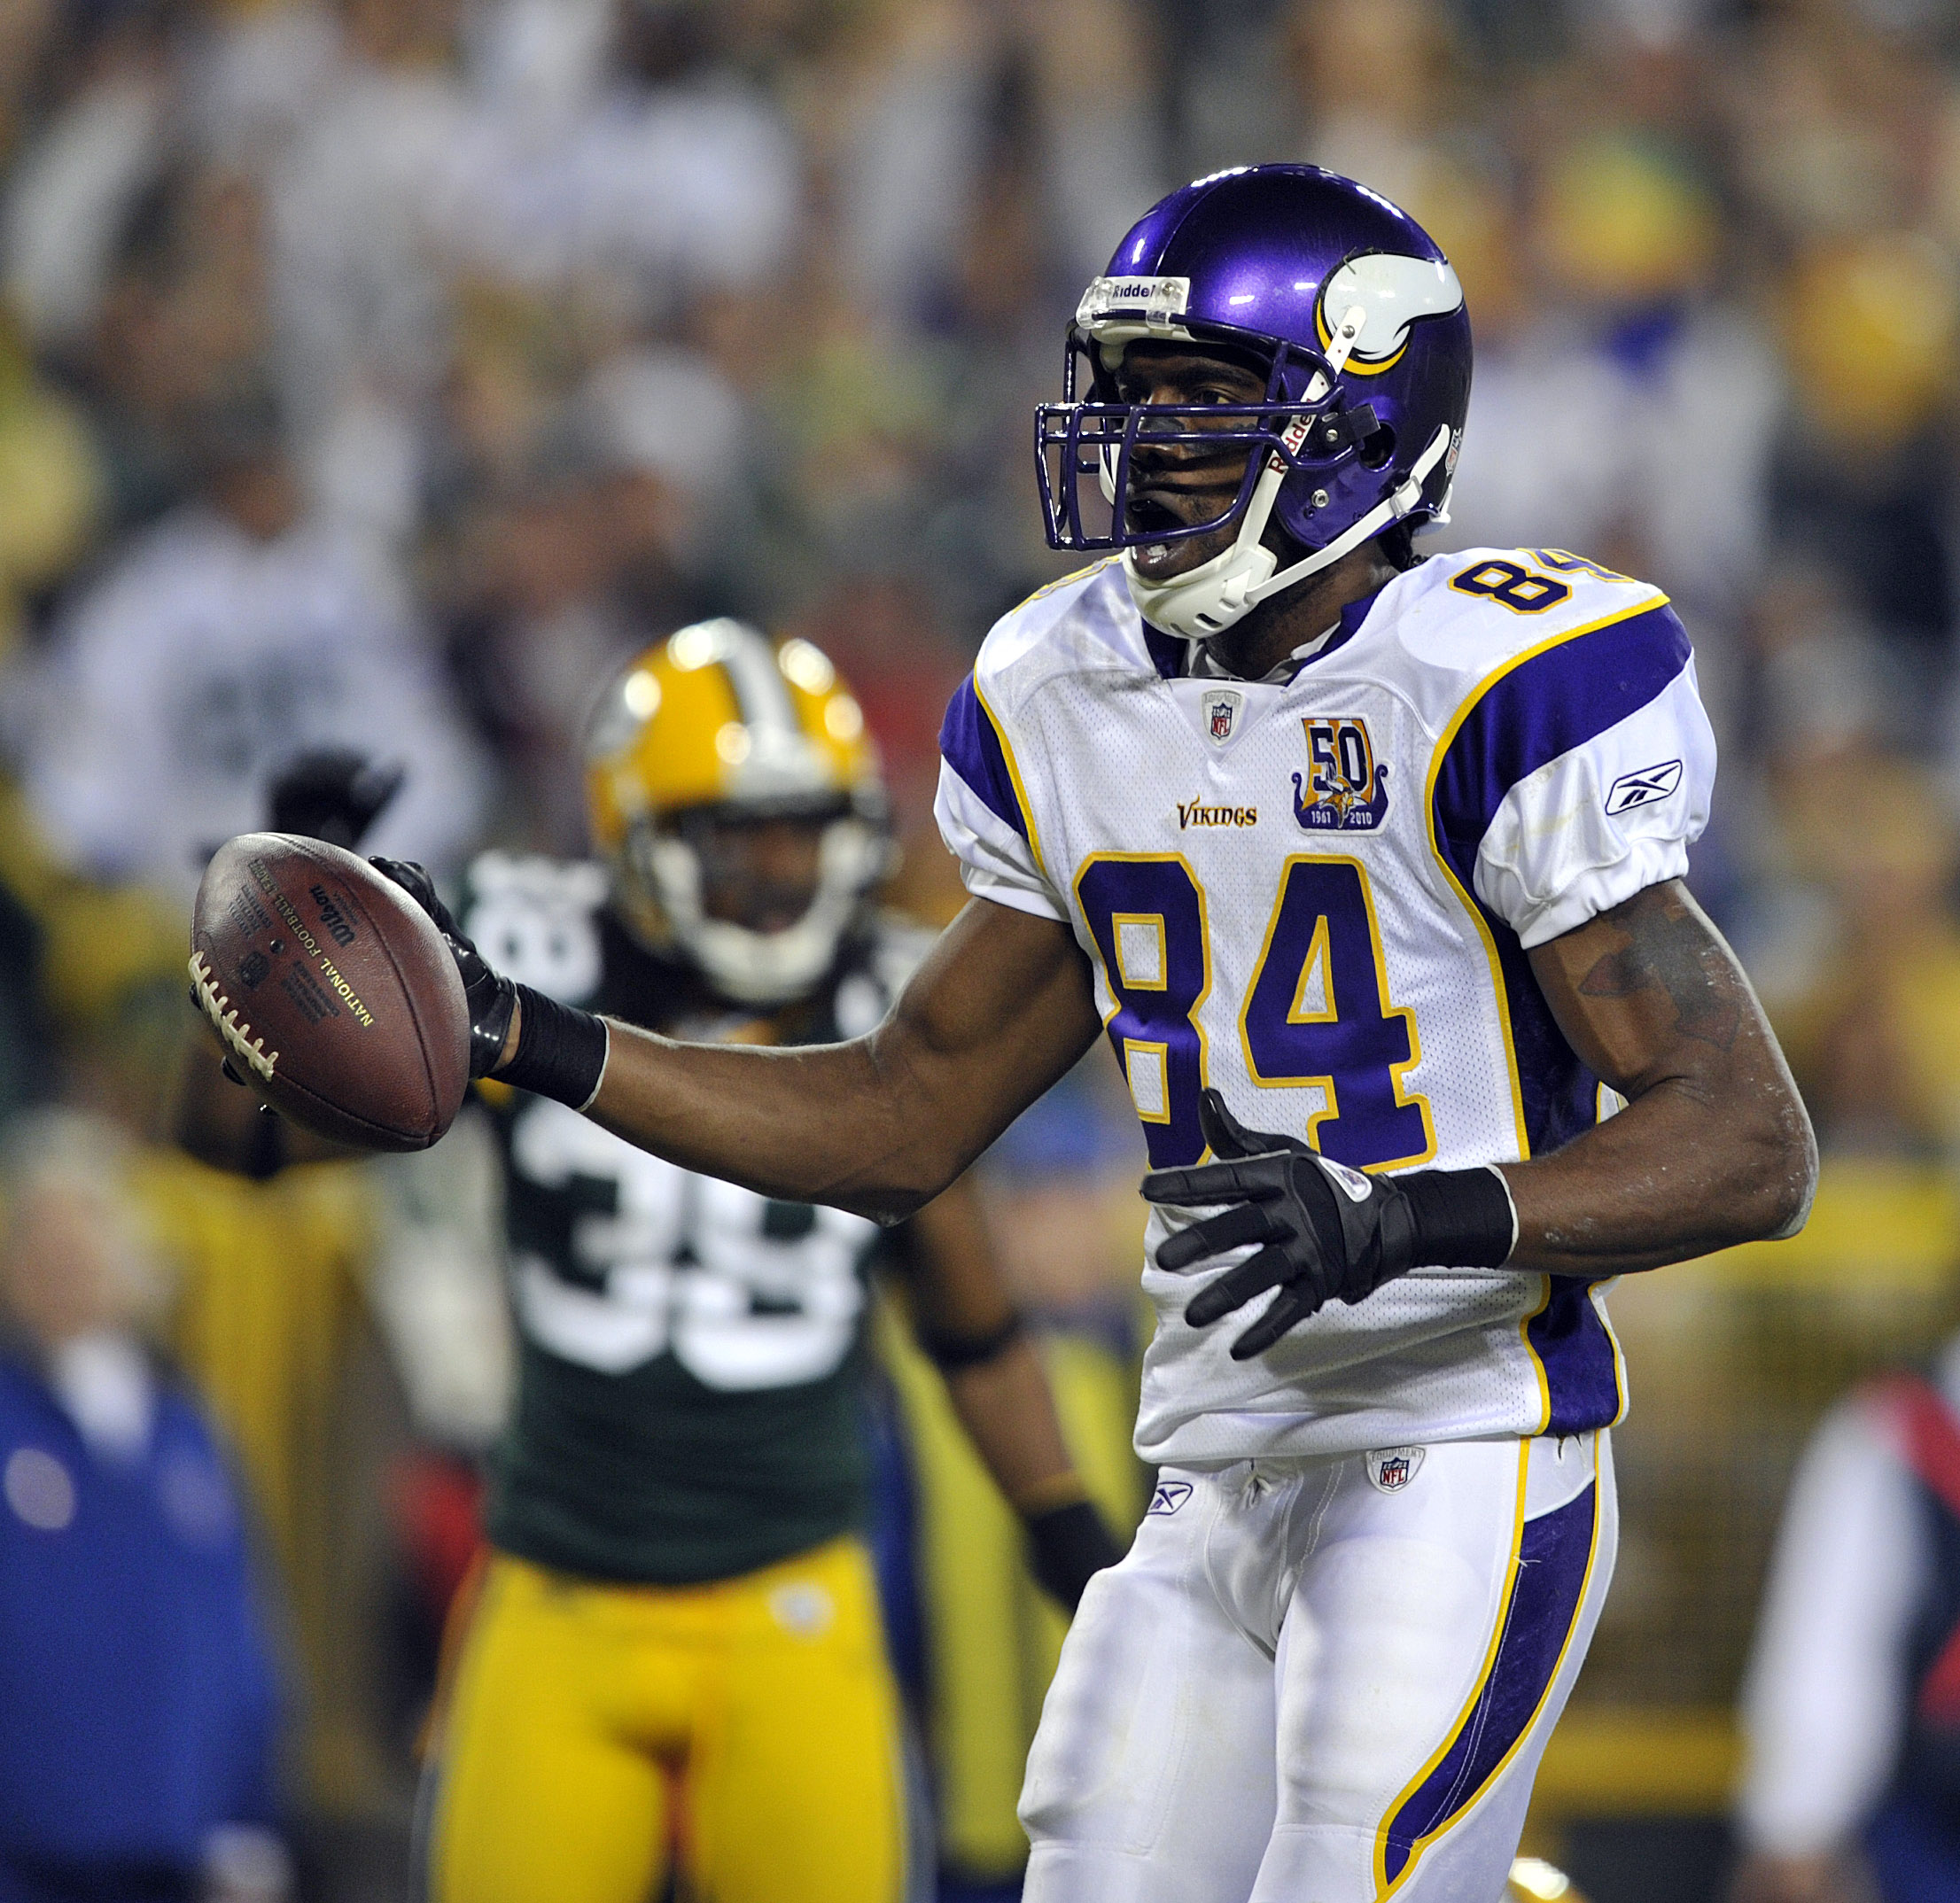 GREEN BAY, WI - OCTOBER 24:  Randy Moss #84 of the Minnesota Vikings celebrates a touchdown against the Green Bay Packers during their game at Lambeau Field on October 24, 2010 in Green Bay, Wisconsin. (Photo by Jim Prisching/Getty Images)